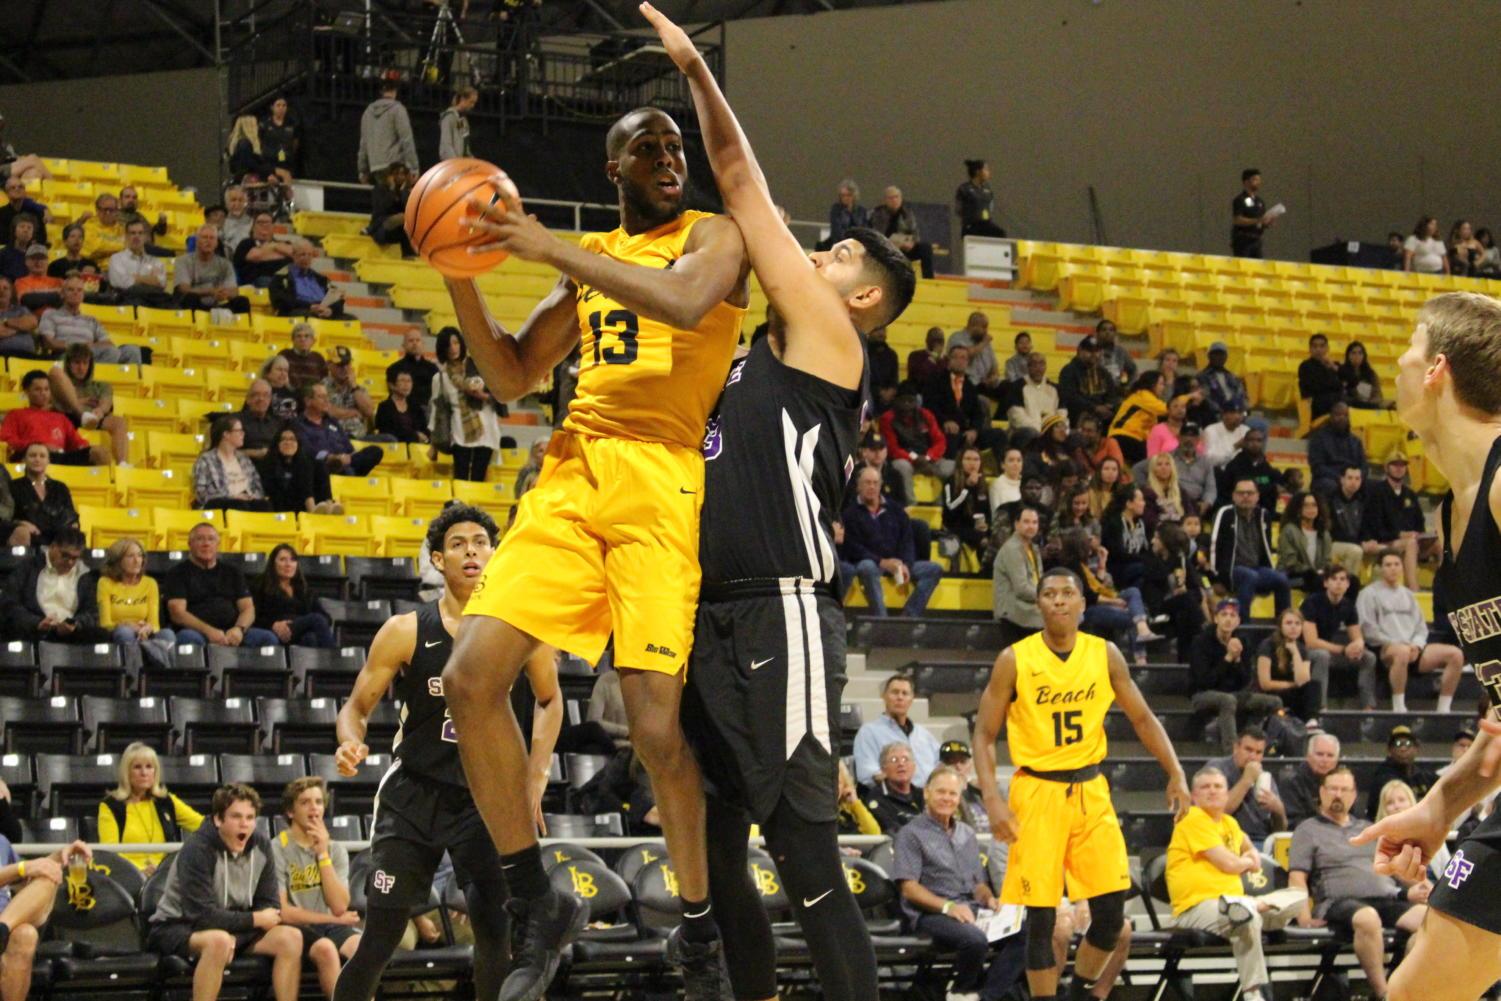 Long Beach State senior forward Barry Ogalue looks to pass the ball while he is under the basket in Tuesday's game against San Francisco State at the Walter Pyramid.